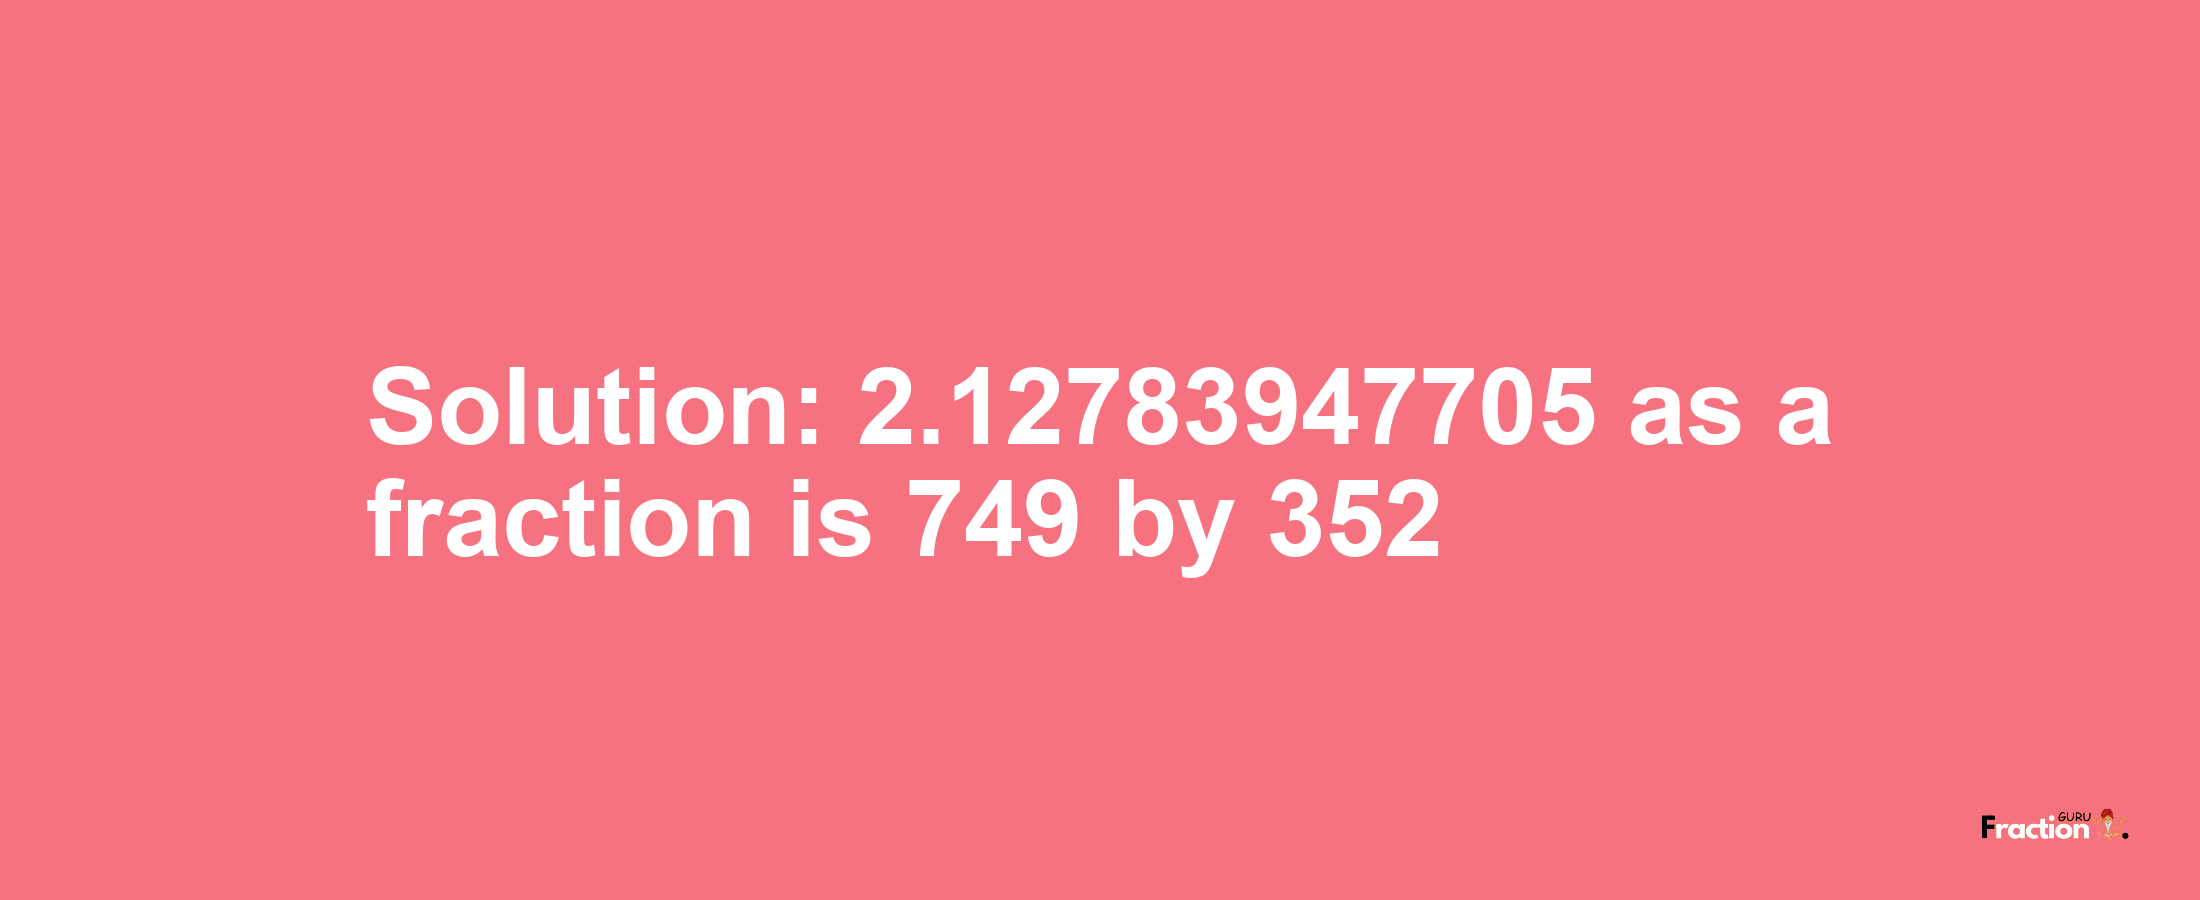 Solution:2.12783947705 as a fraction is 749/352